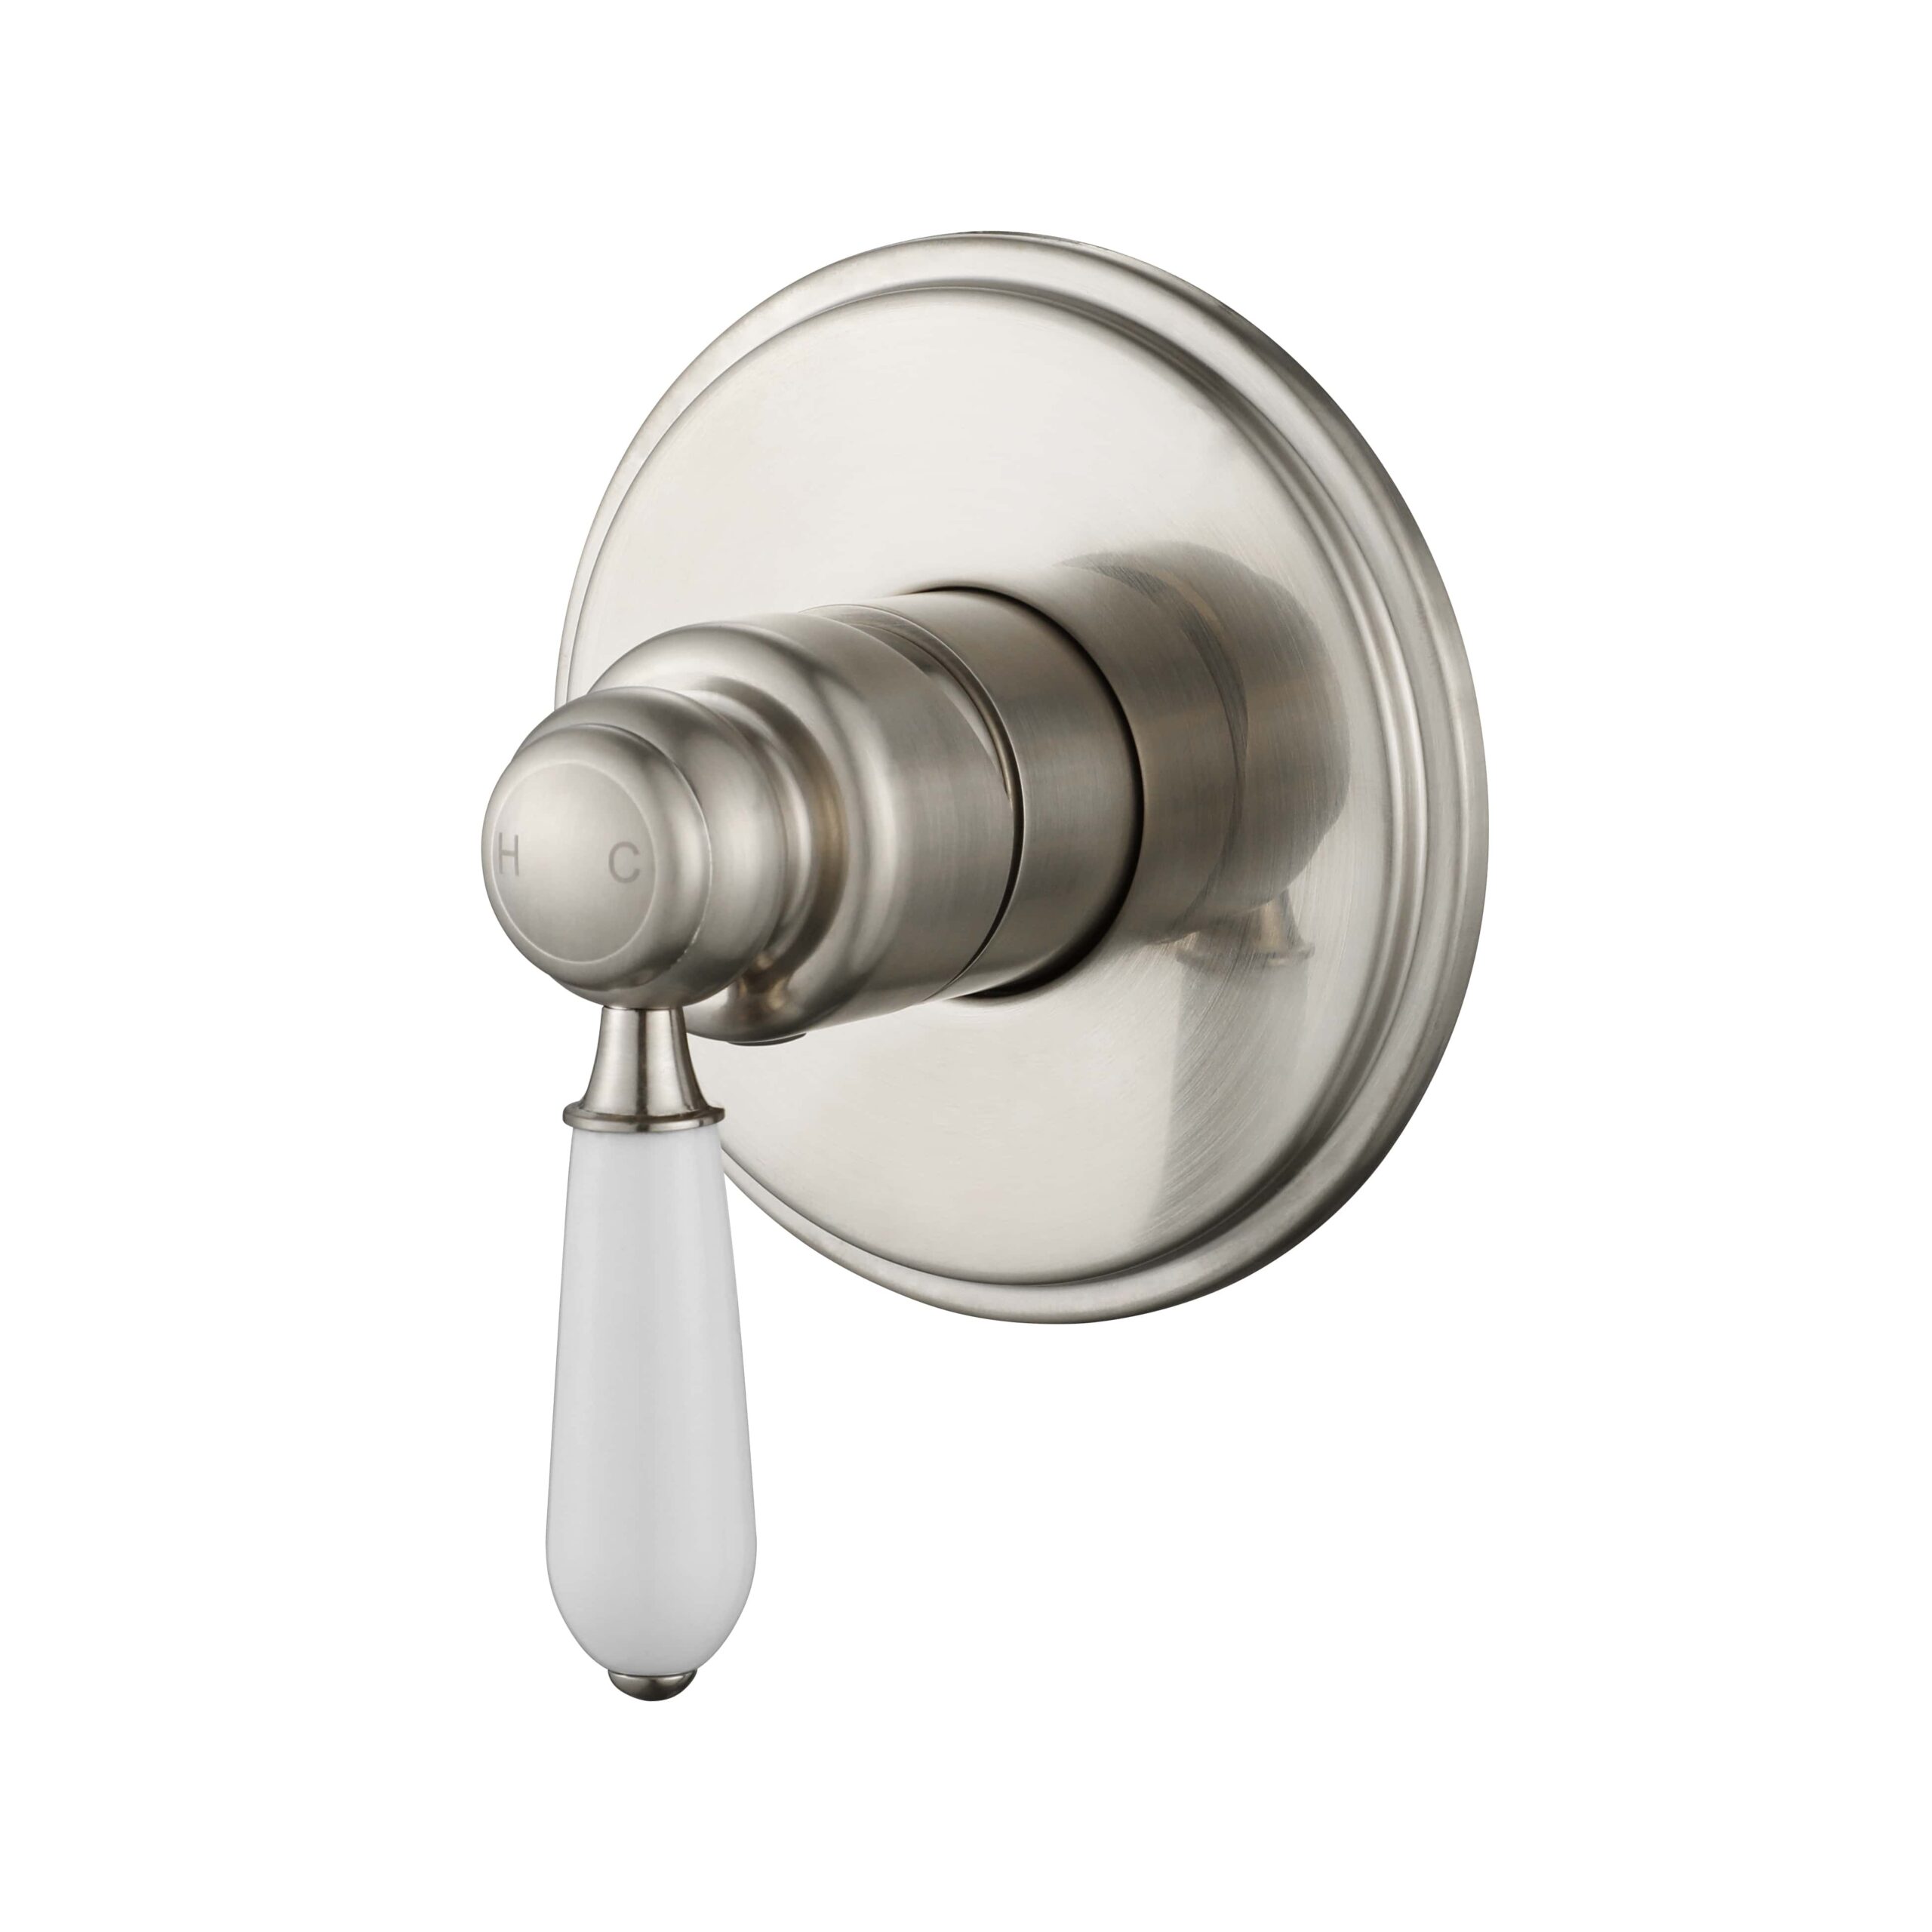 Bordeaux Brushed Nickel Wall Mixer